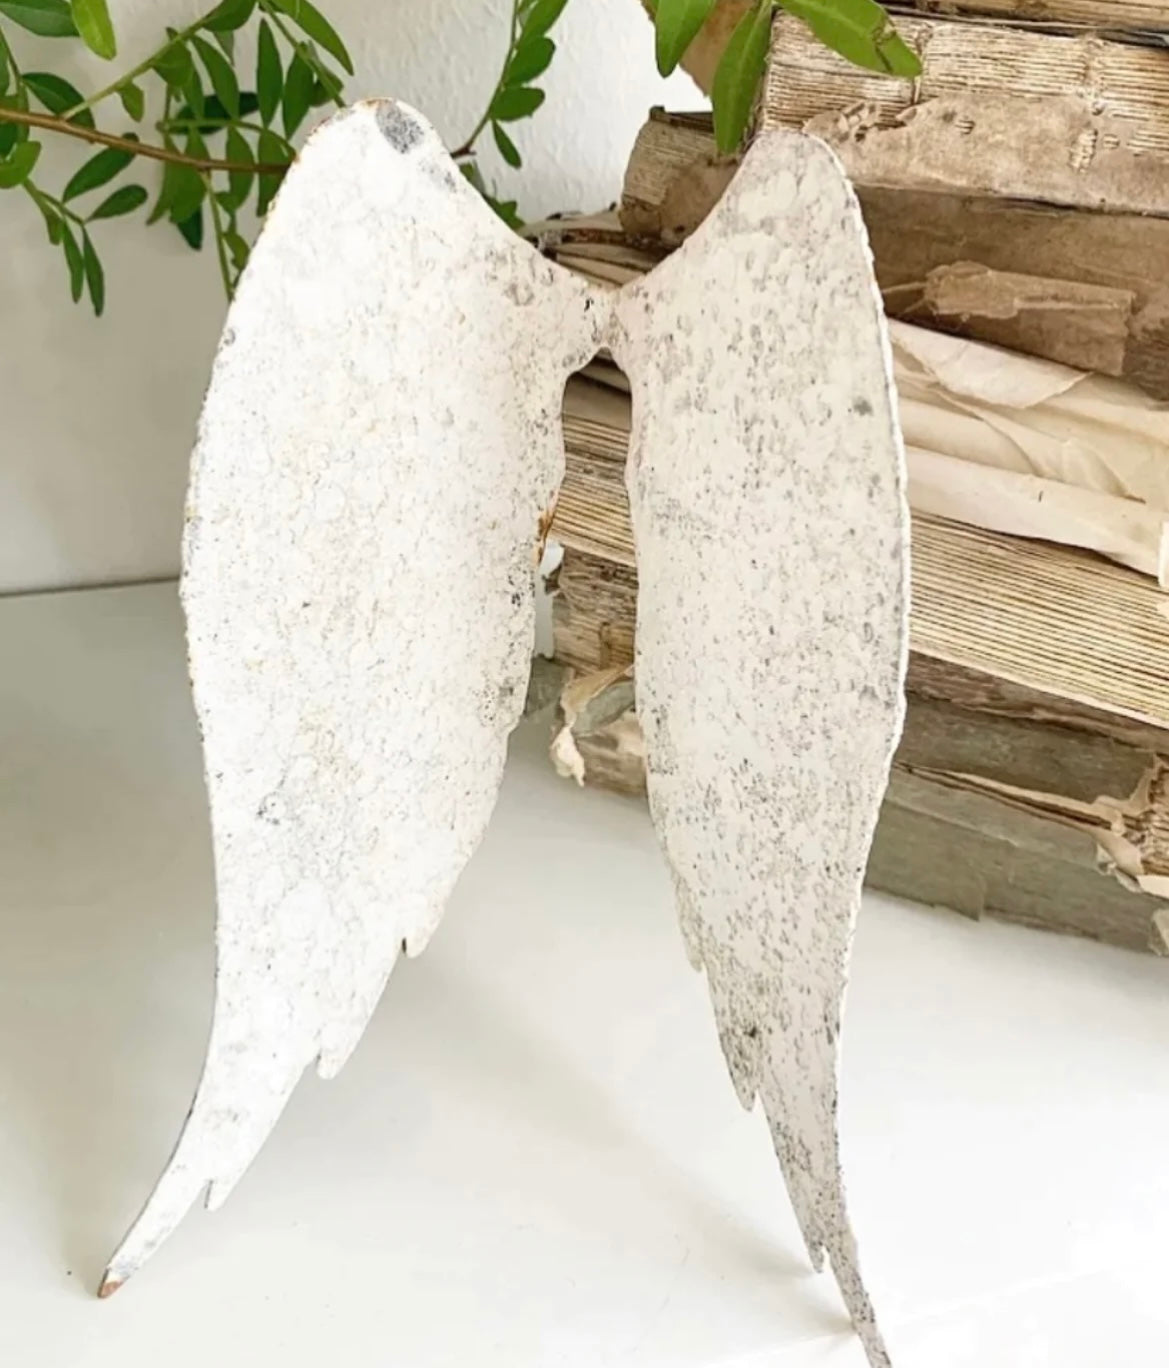 Hand crafted metal bottle wings